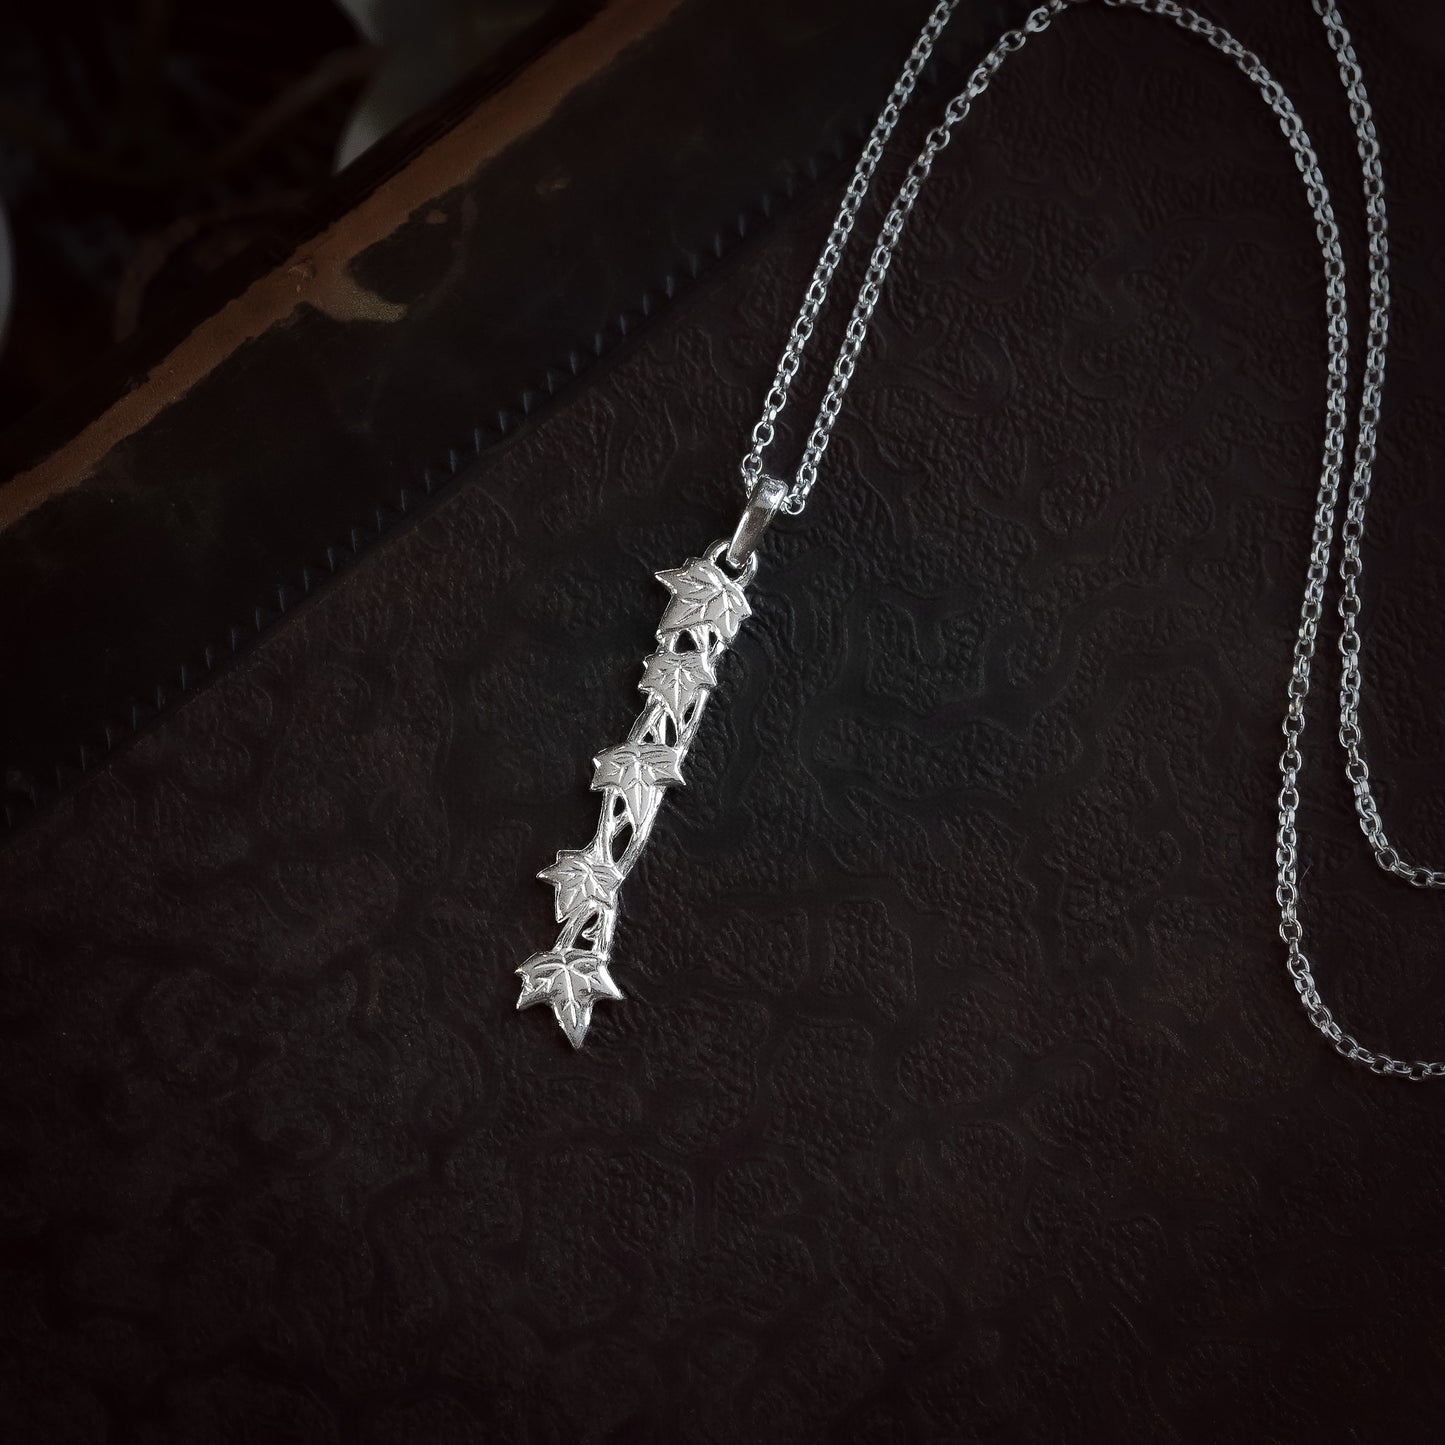 Ivy Vine and Leaf Long Silver Pendant Necklace